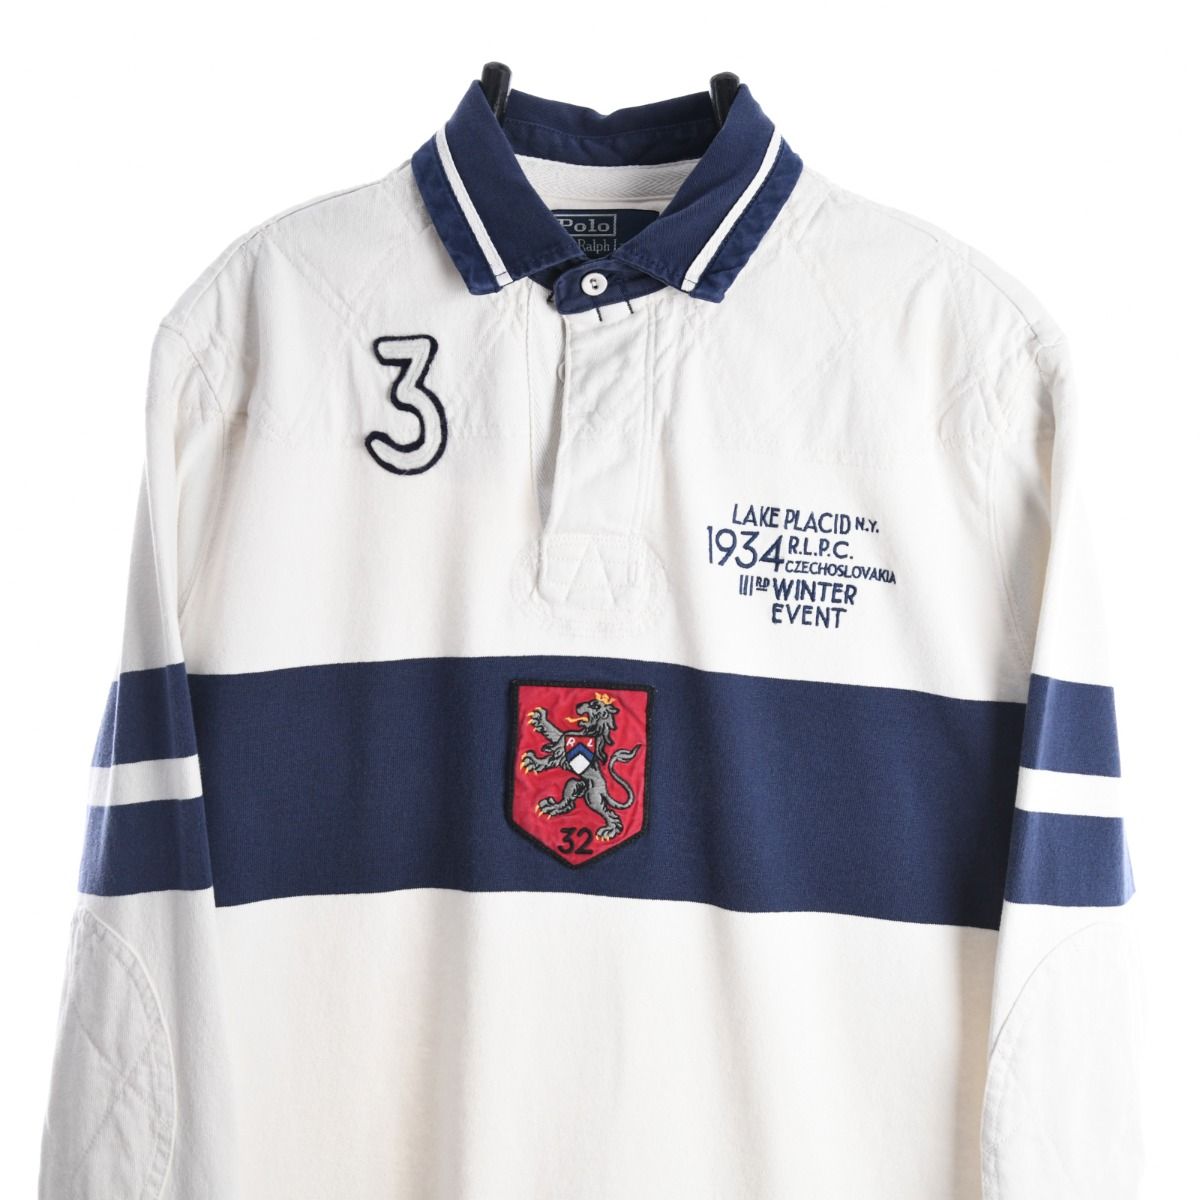  Ralph Lauren Lake Placid NY 1934 Winter Event Rugby Shirt